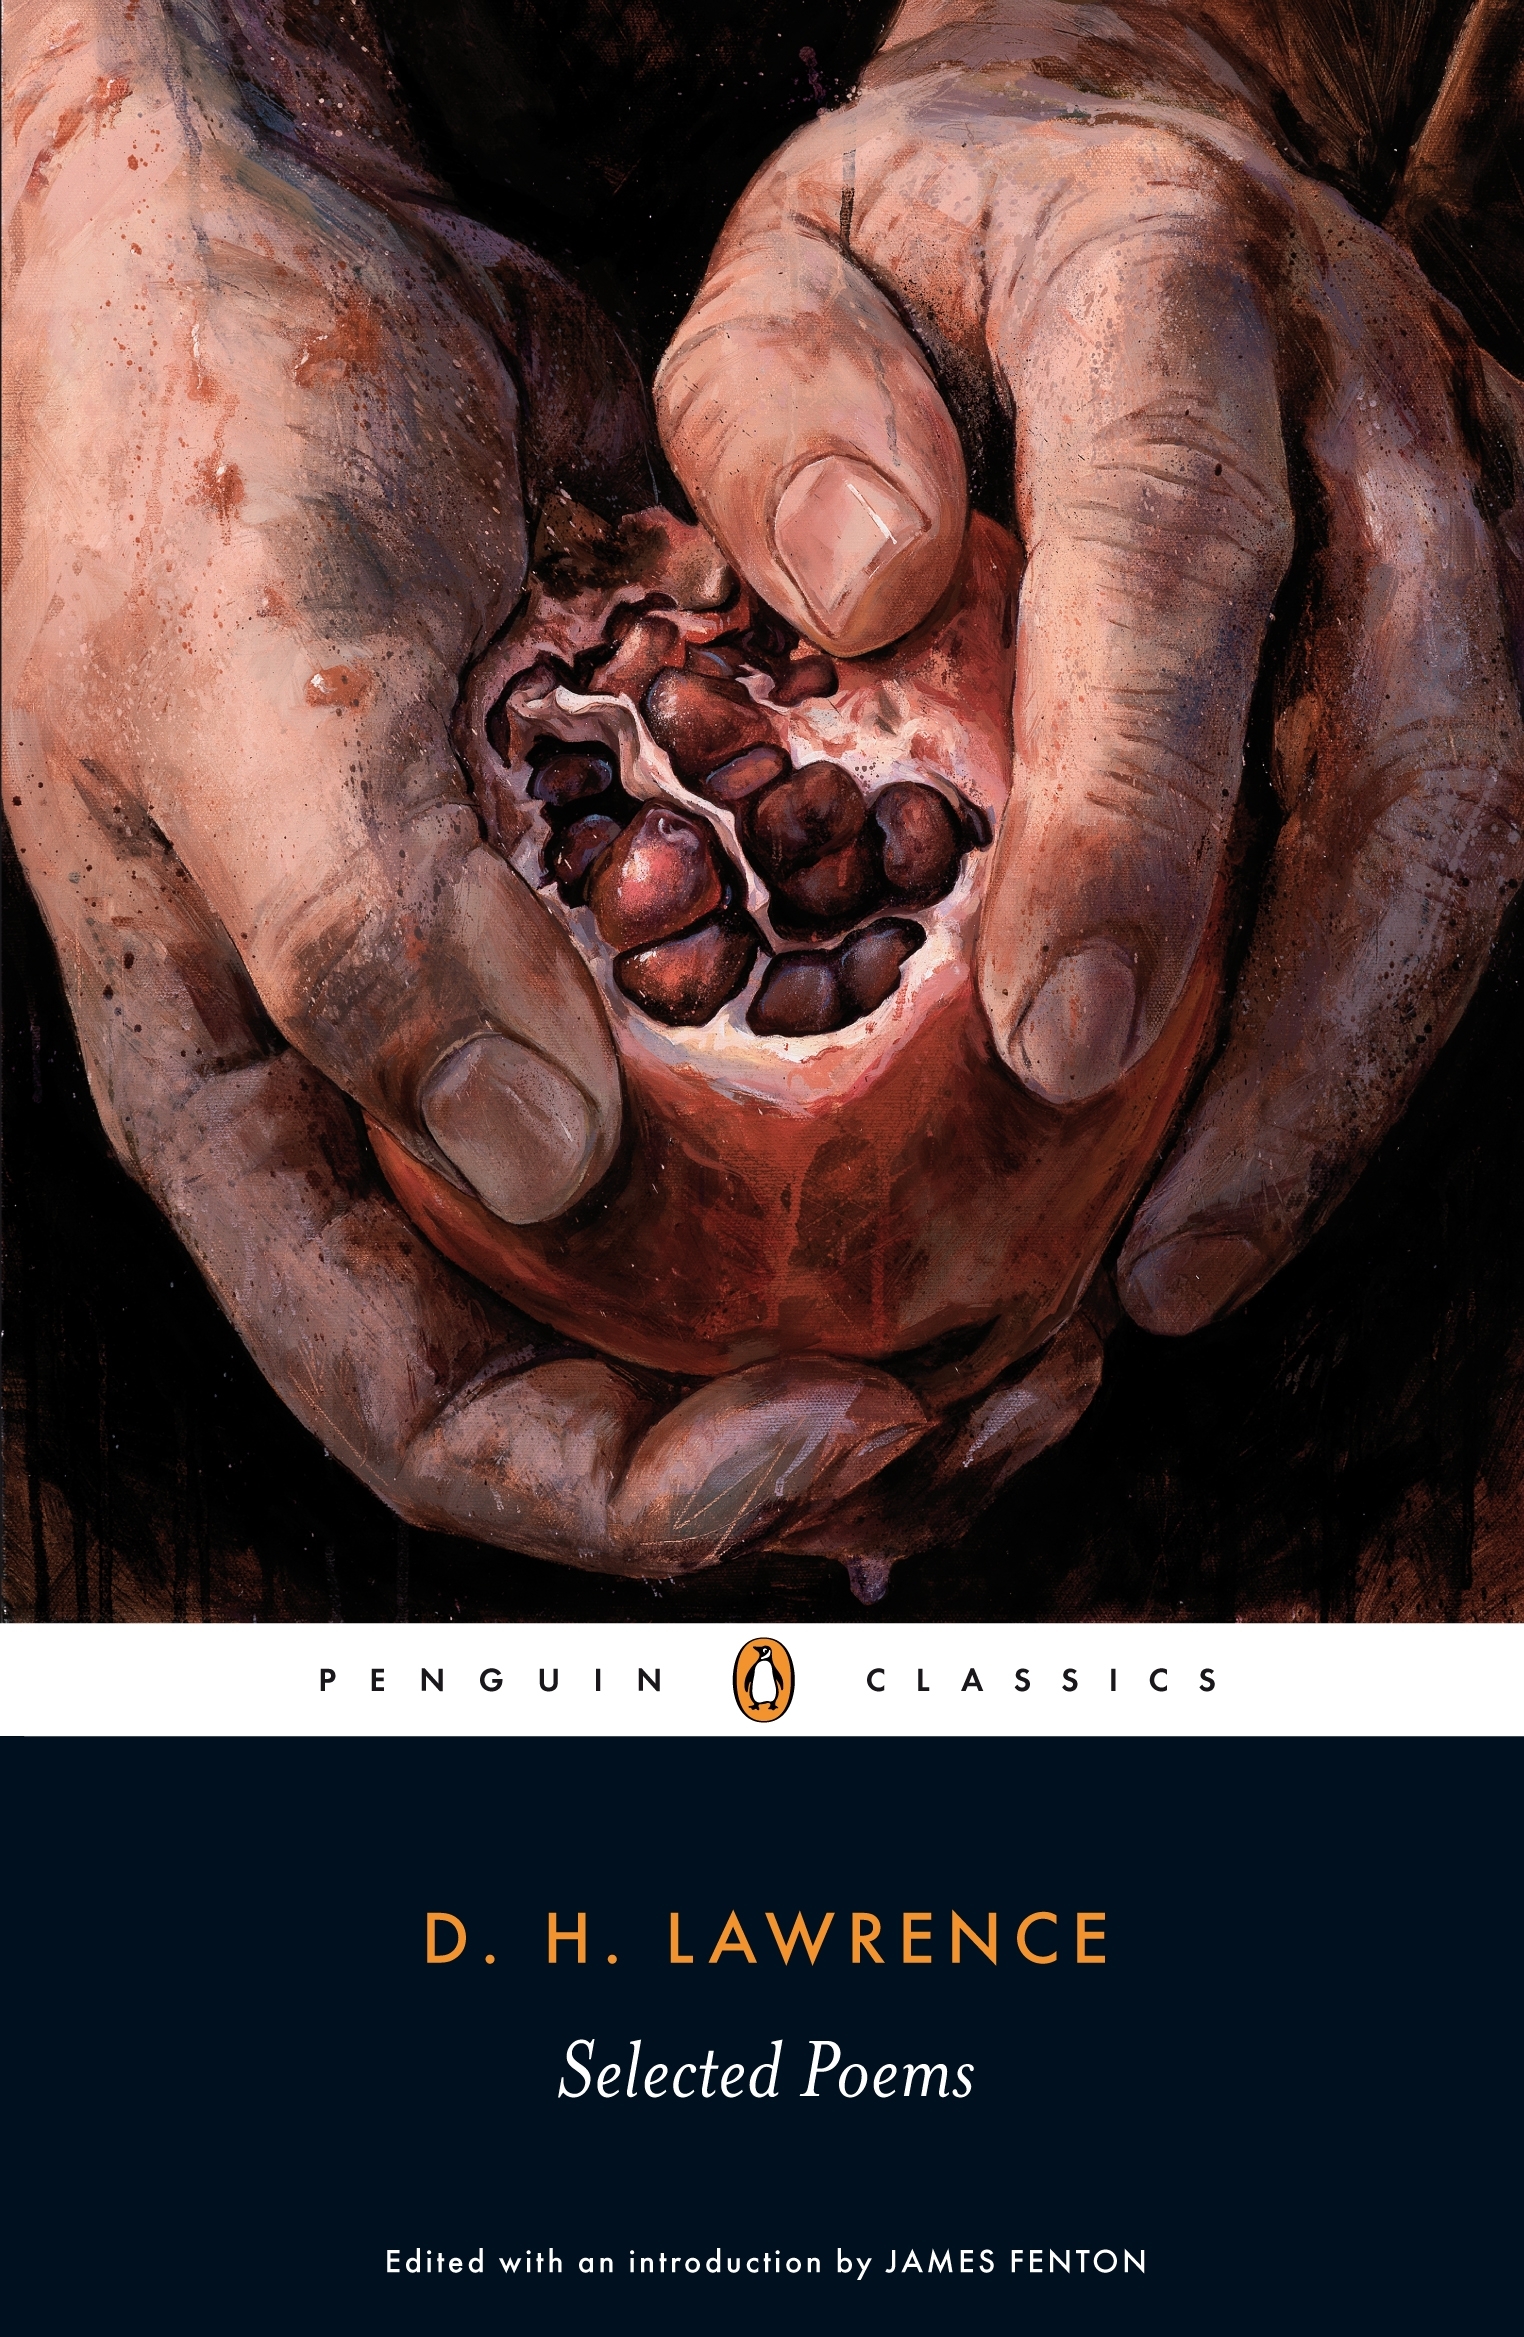 D H Lawrence Selected Poems (Penguin Classics)